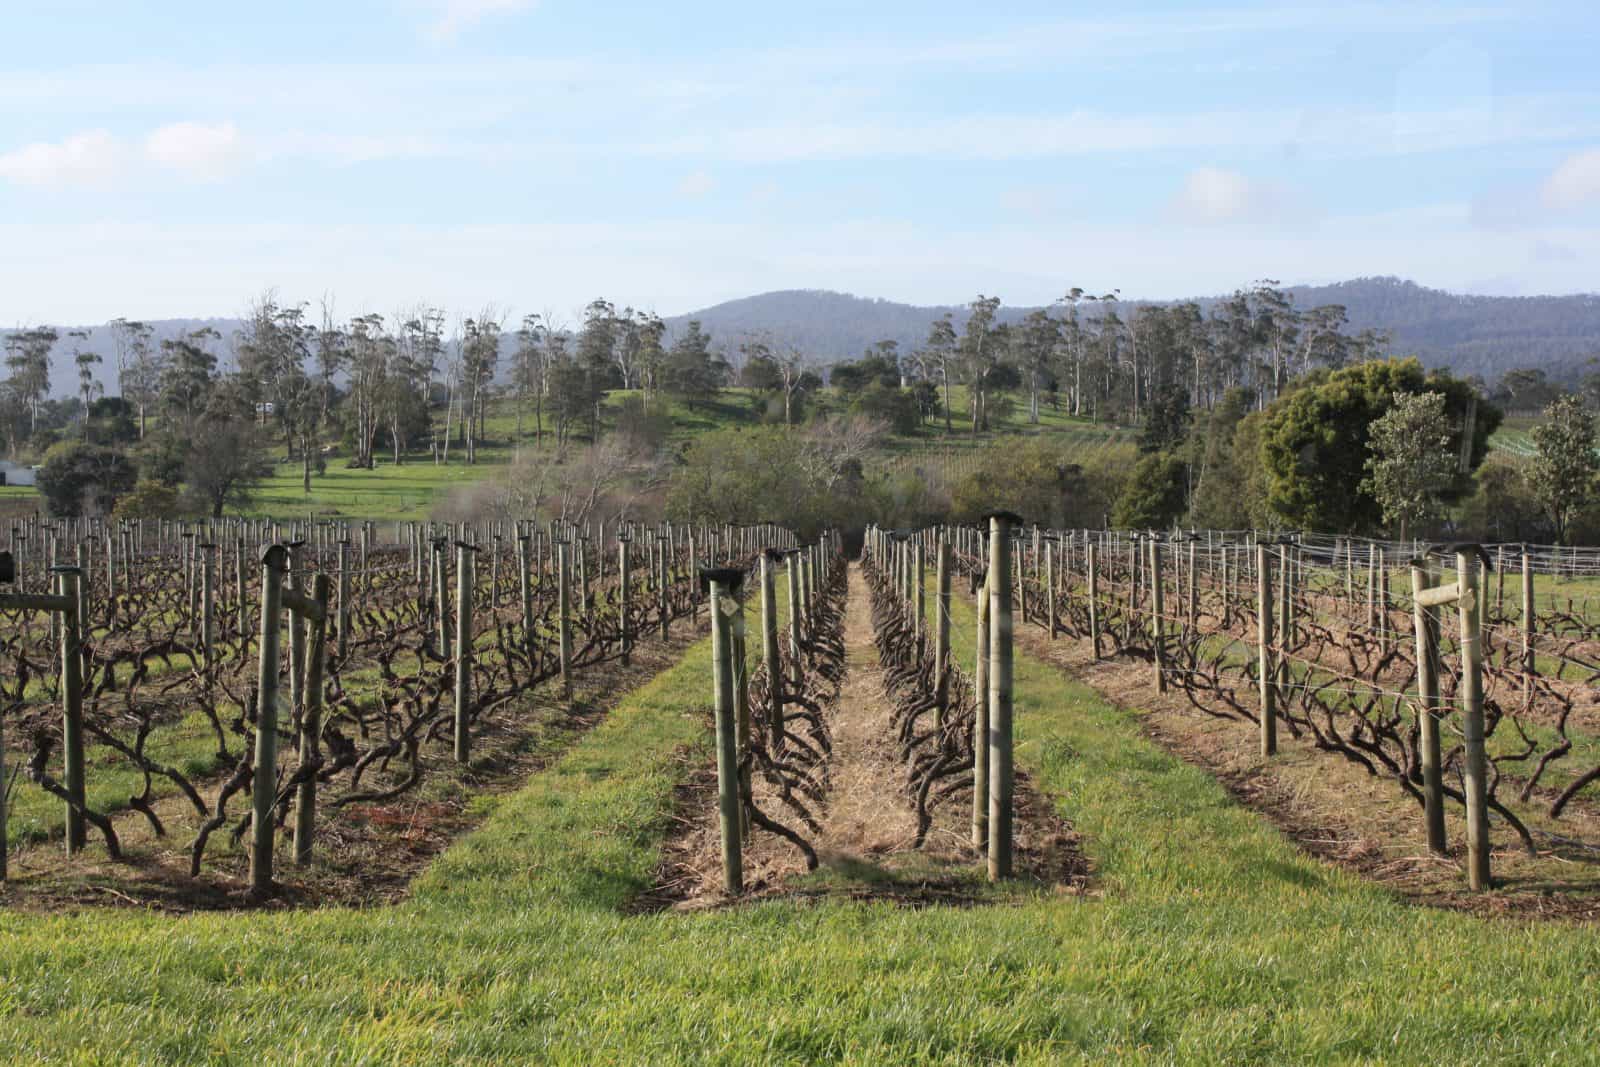 Pinot Grigio vines after pruning